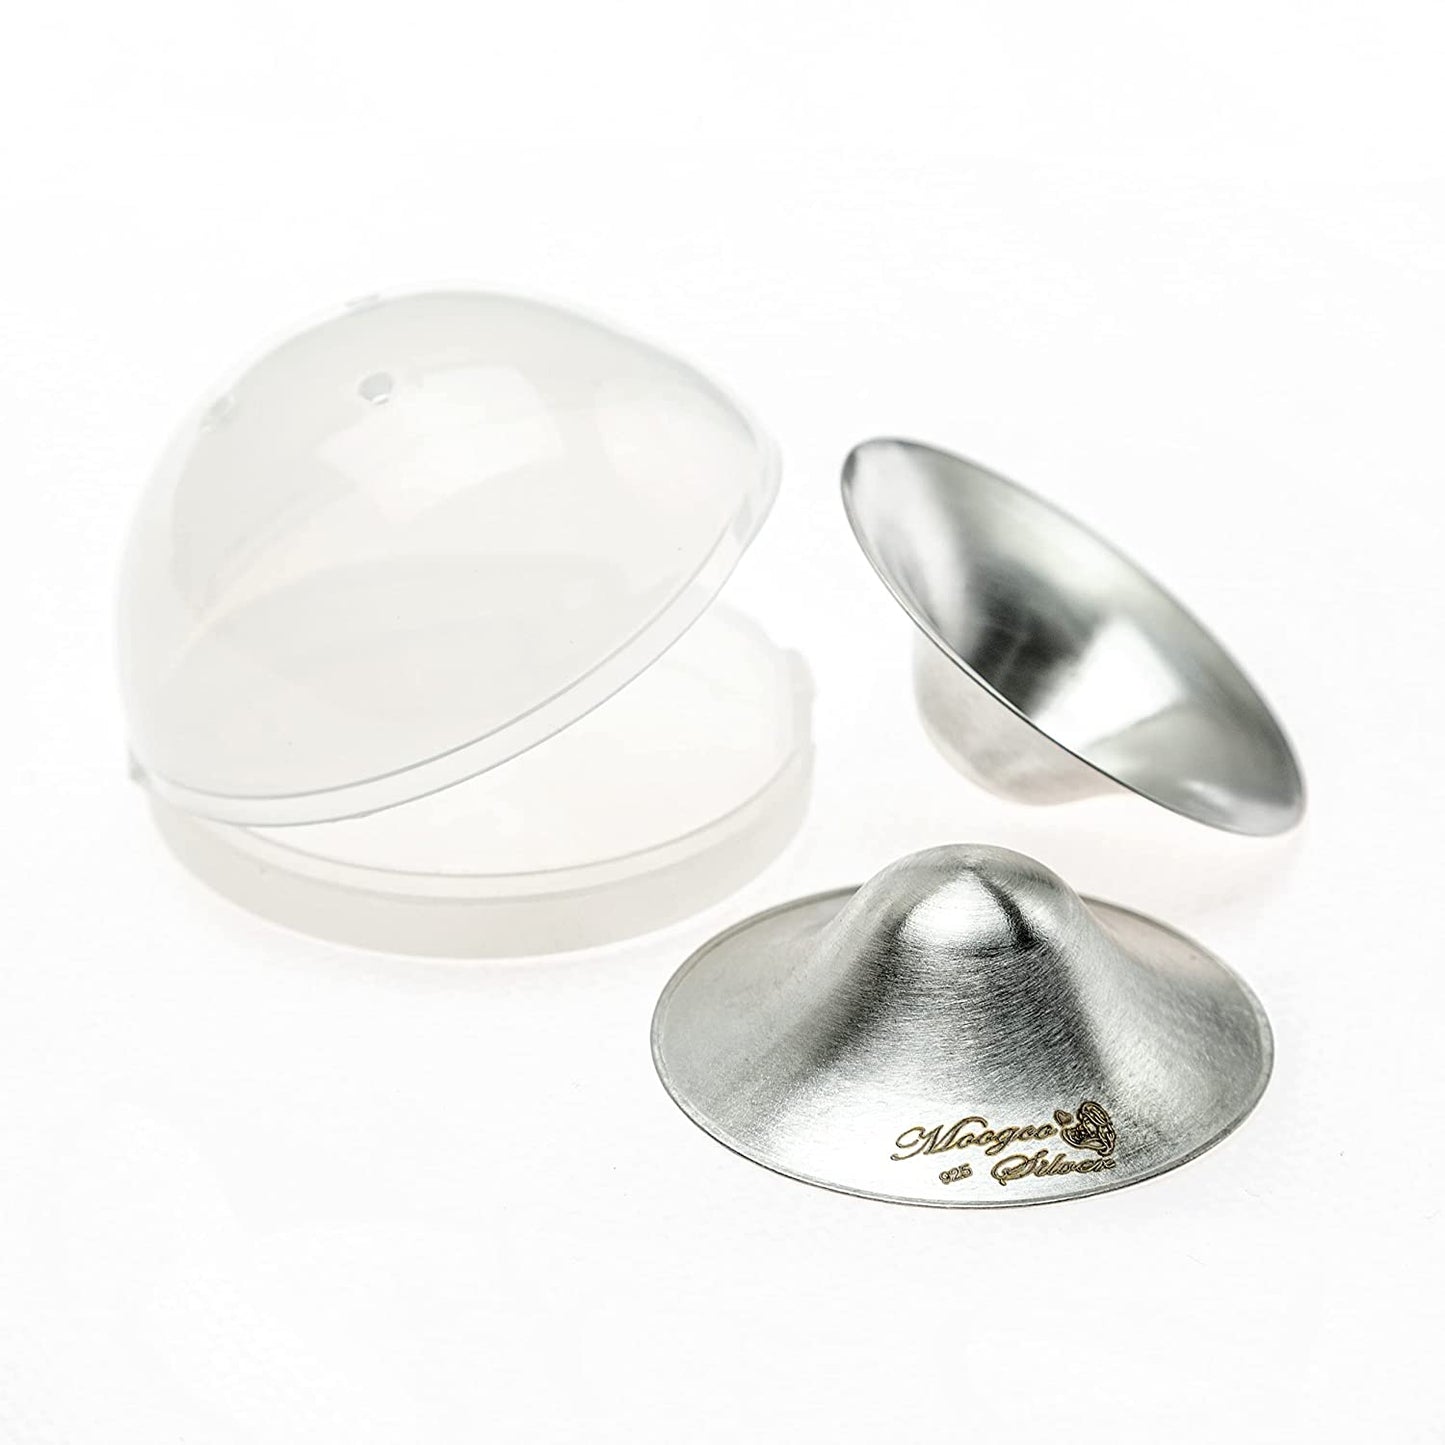 Silver Nursing Cups Earthmother Healing Cups for Breastfeeding 